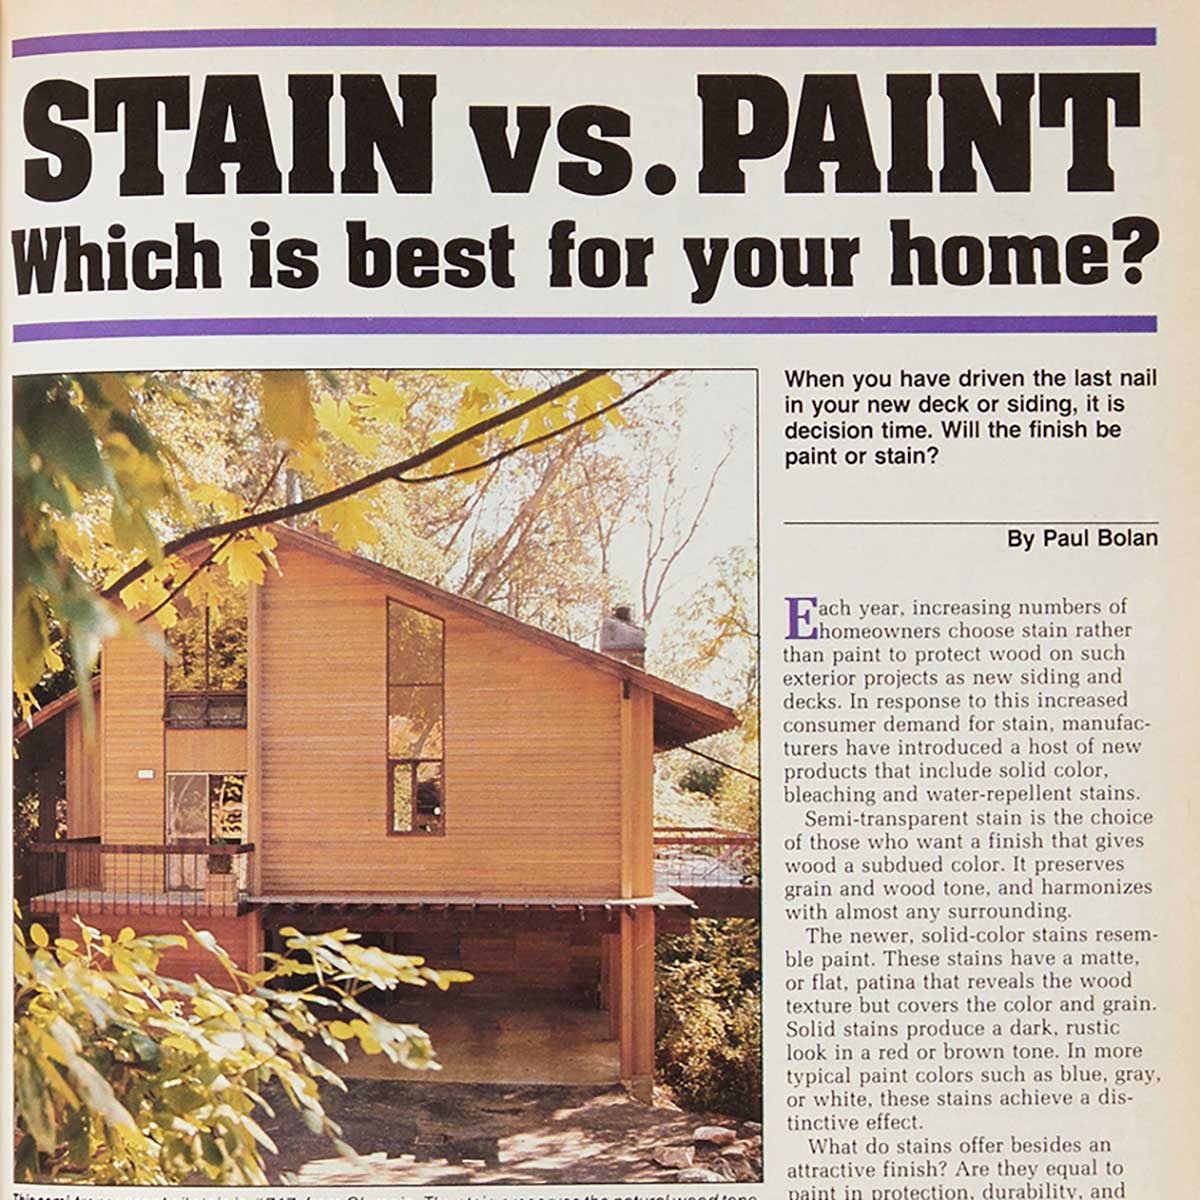 1982 Family Handyman Feature: Stain vs. Paint?